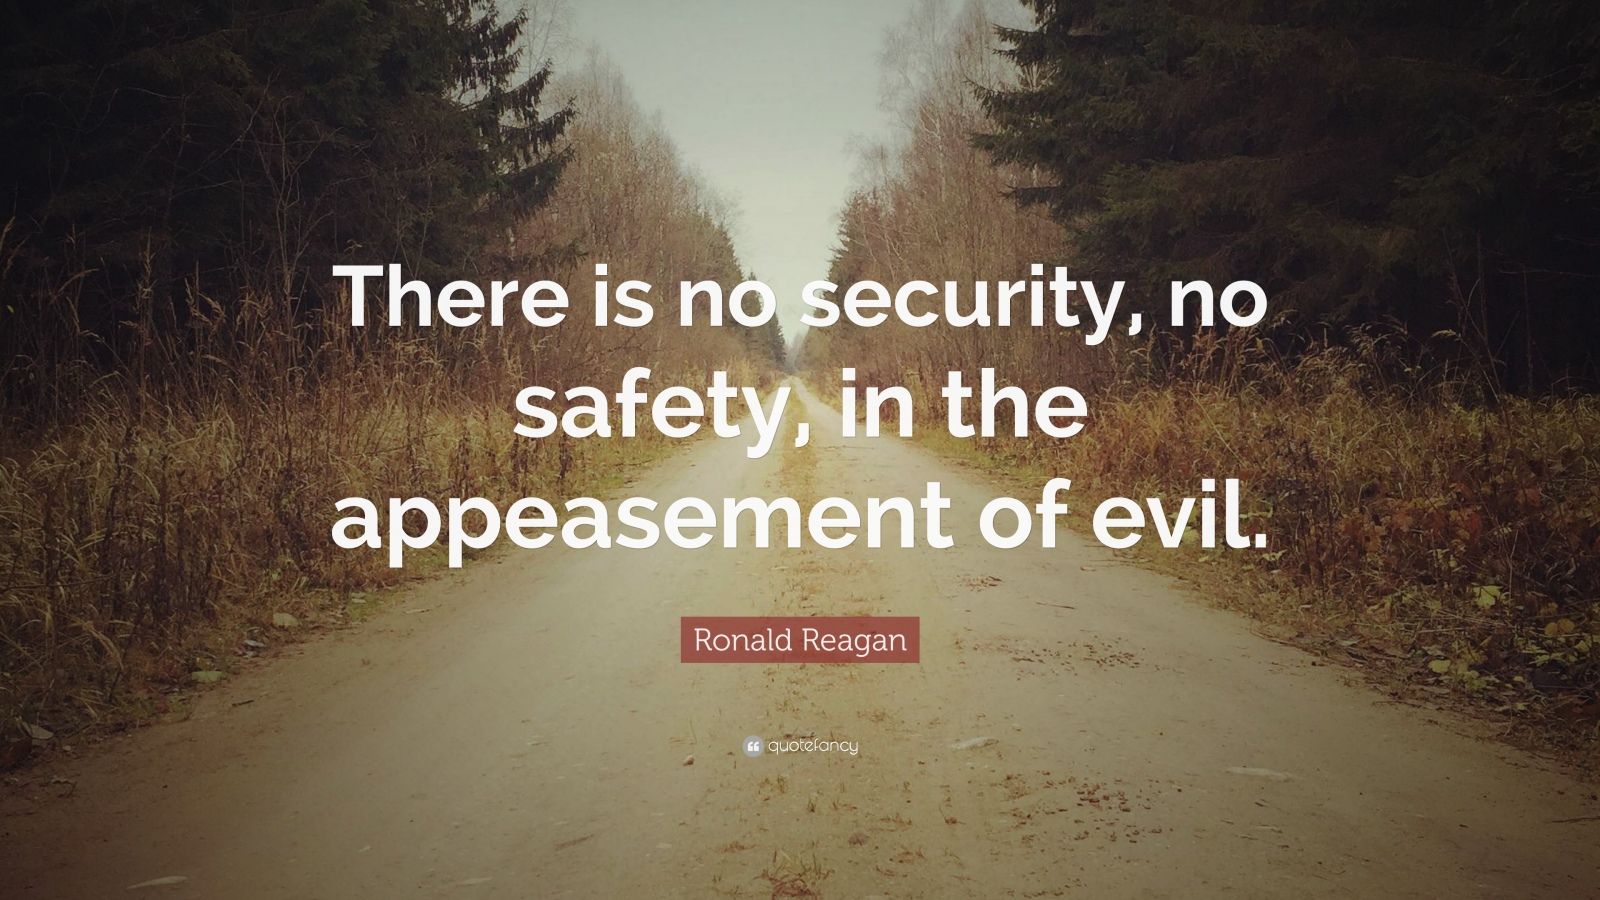 Ronald Reagan Quote: “There is no security, no safety, in the